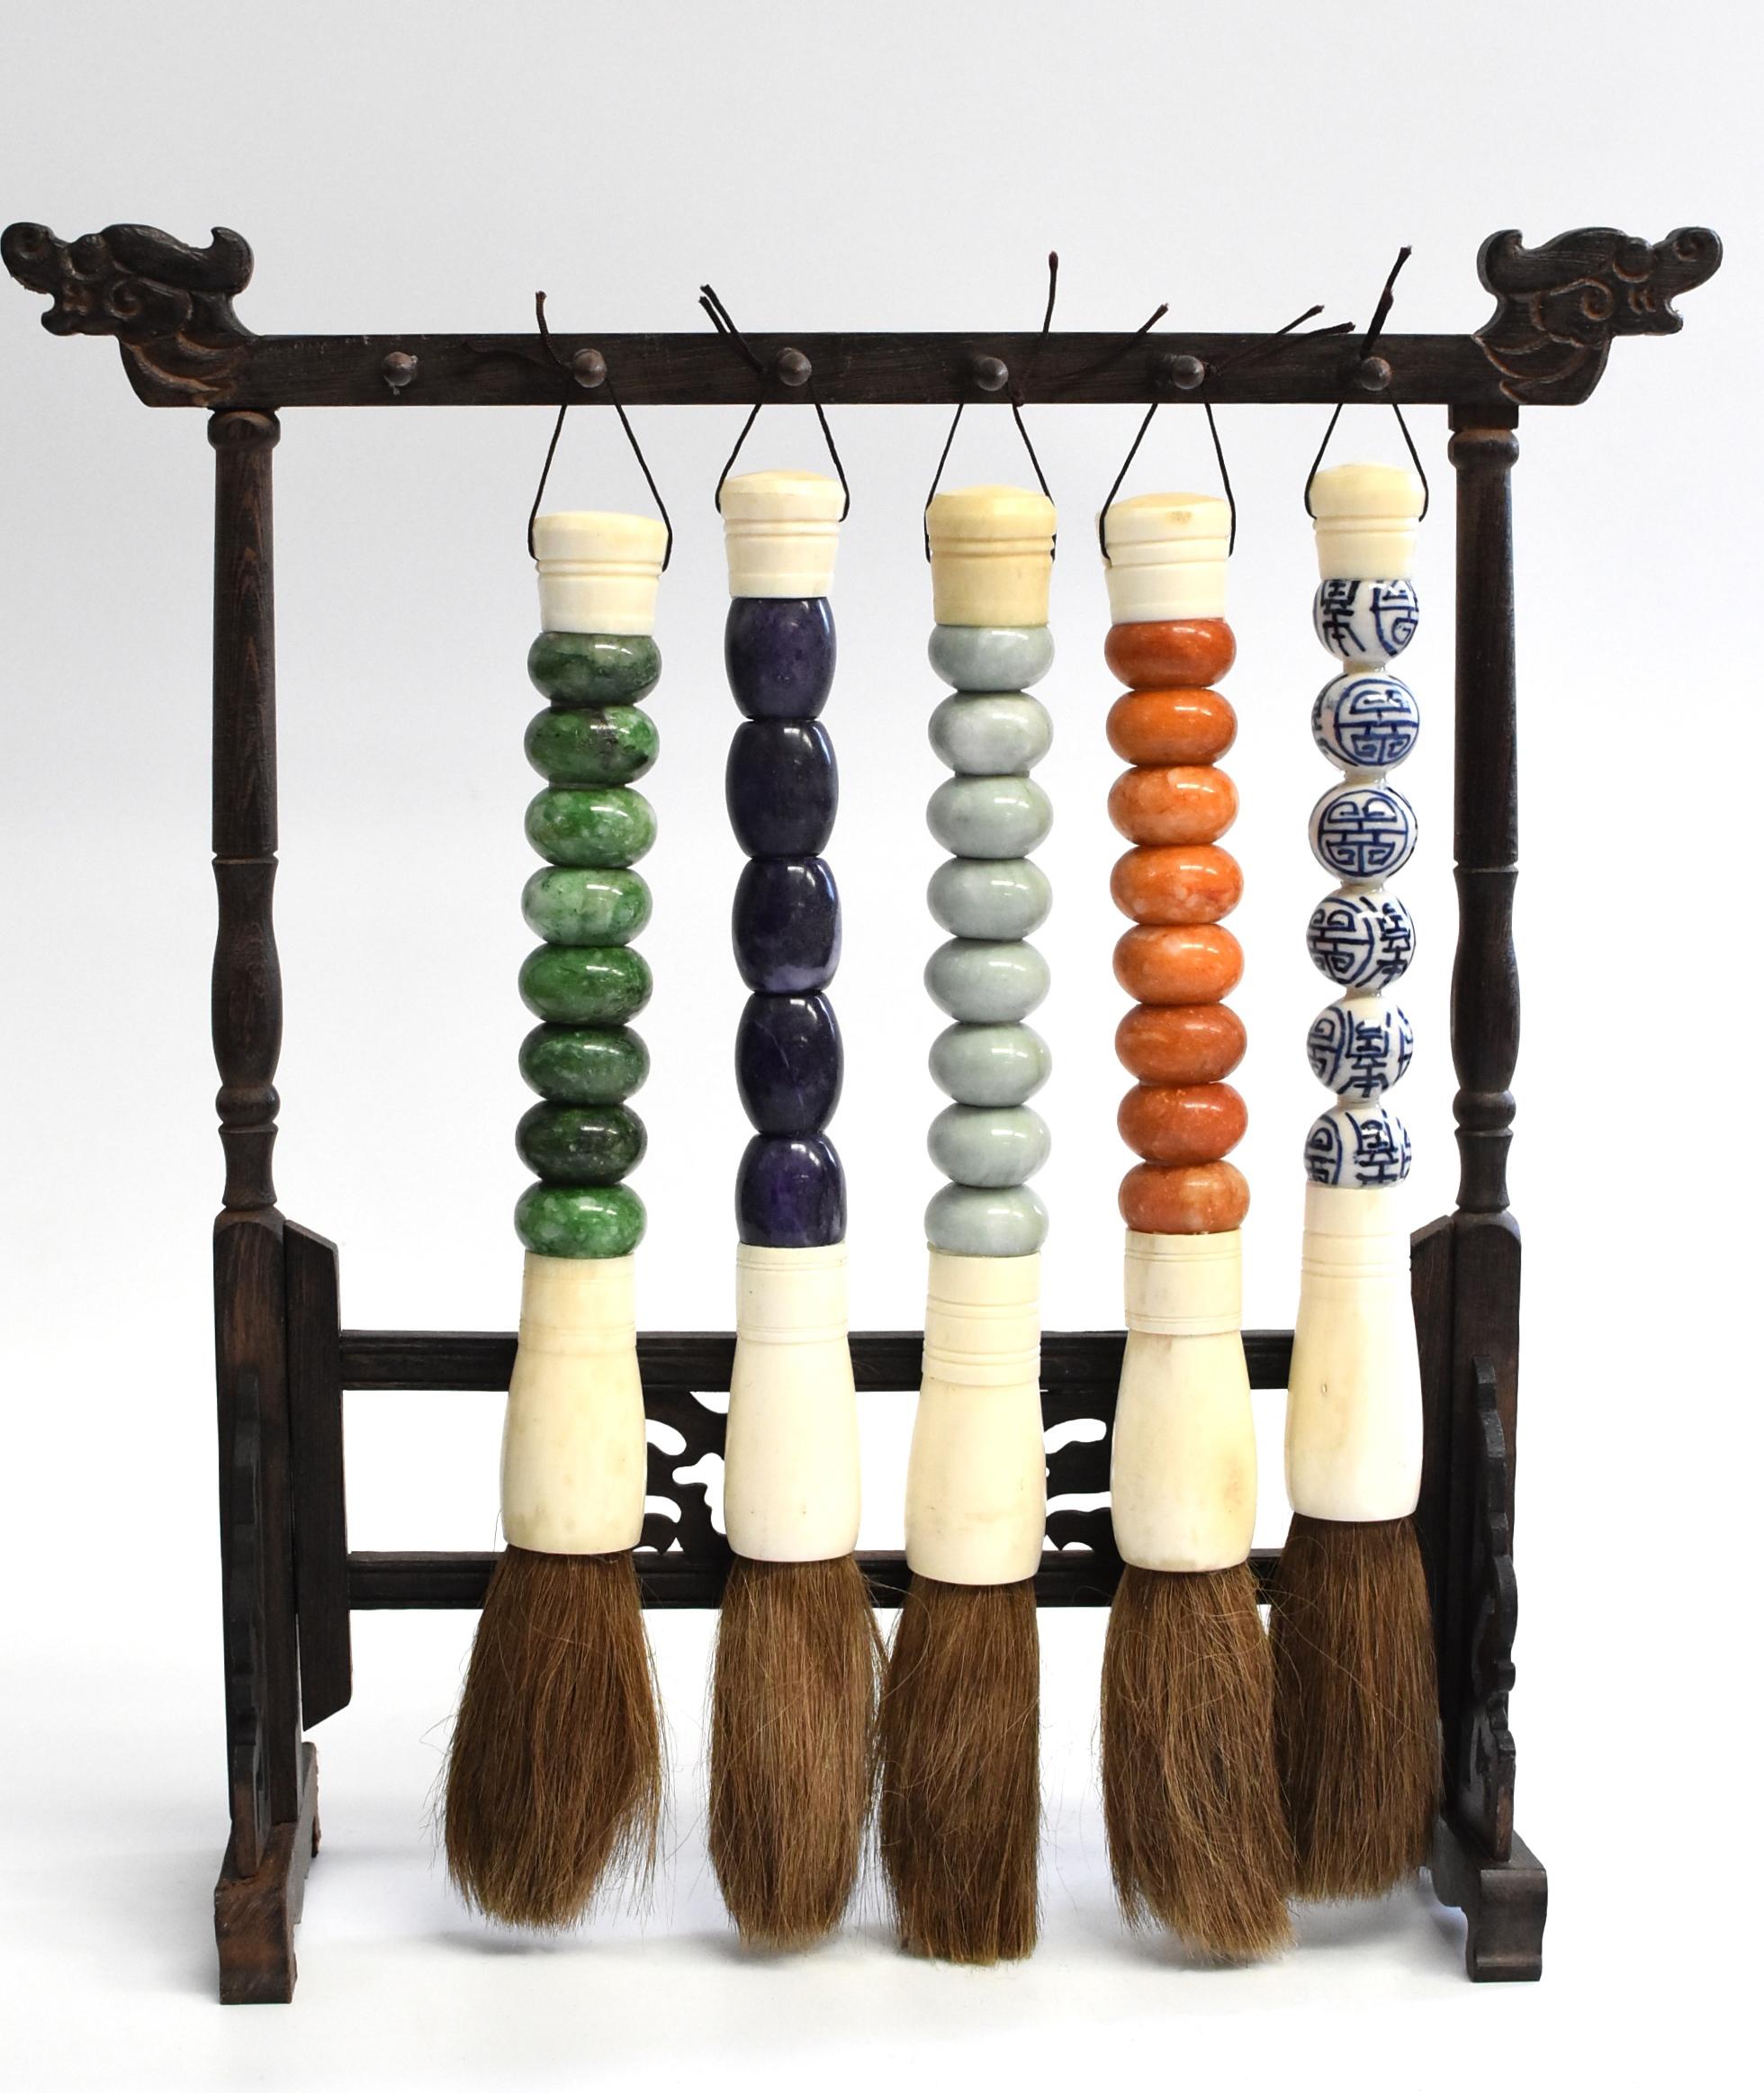 Beautiful set of 5 large Chinese calligraphy brushes with handmade stone and porcelain handles. The collection consists 4 brushes with quartz stone handles and 1 with blue and white double happiness porcelain ball handle. Brushes are handmade with